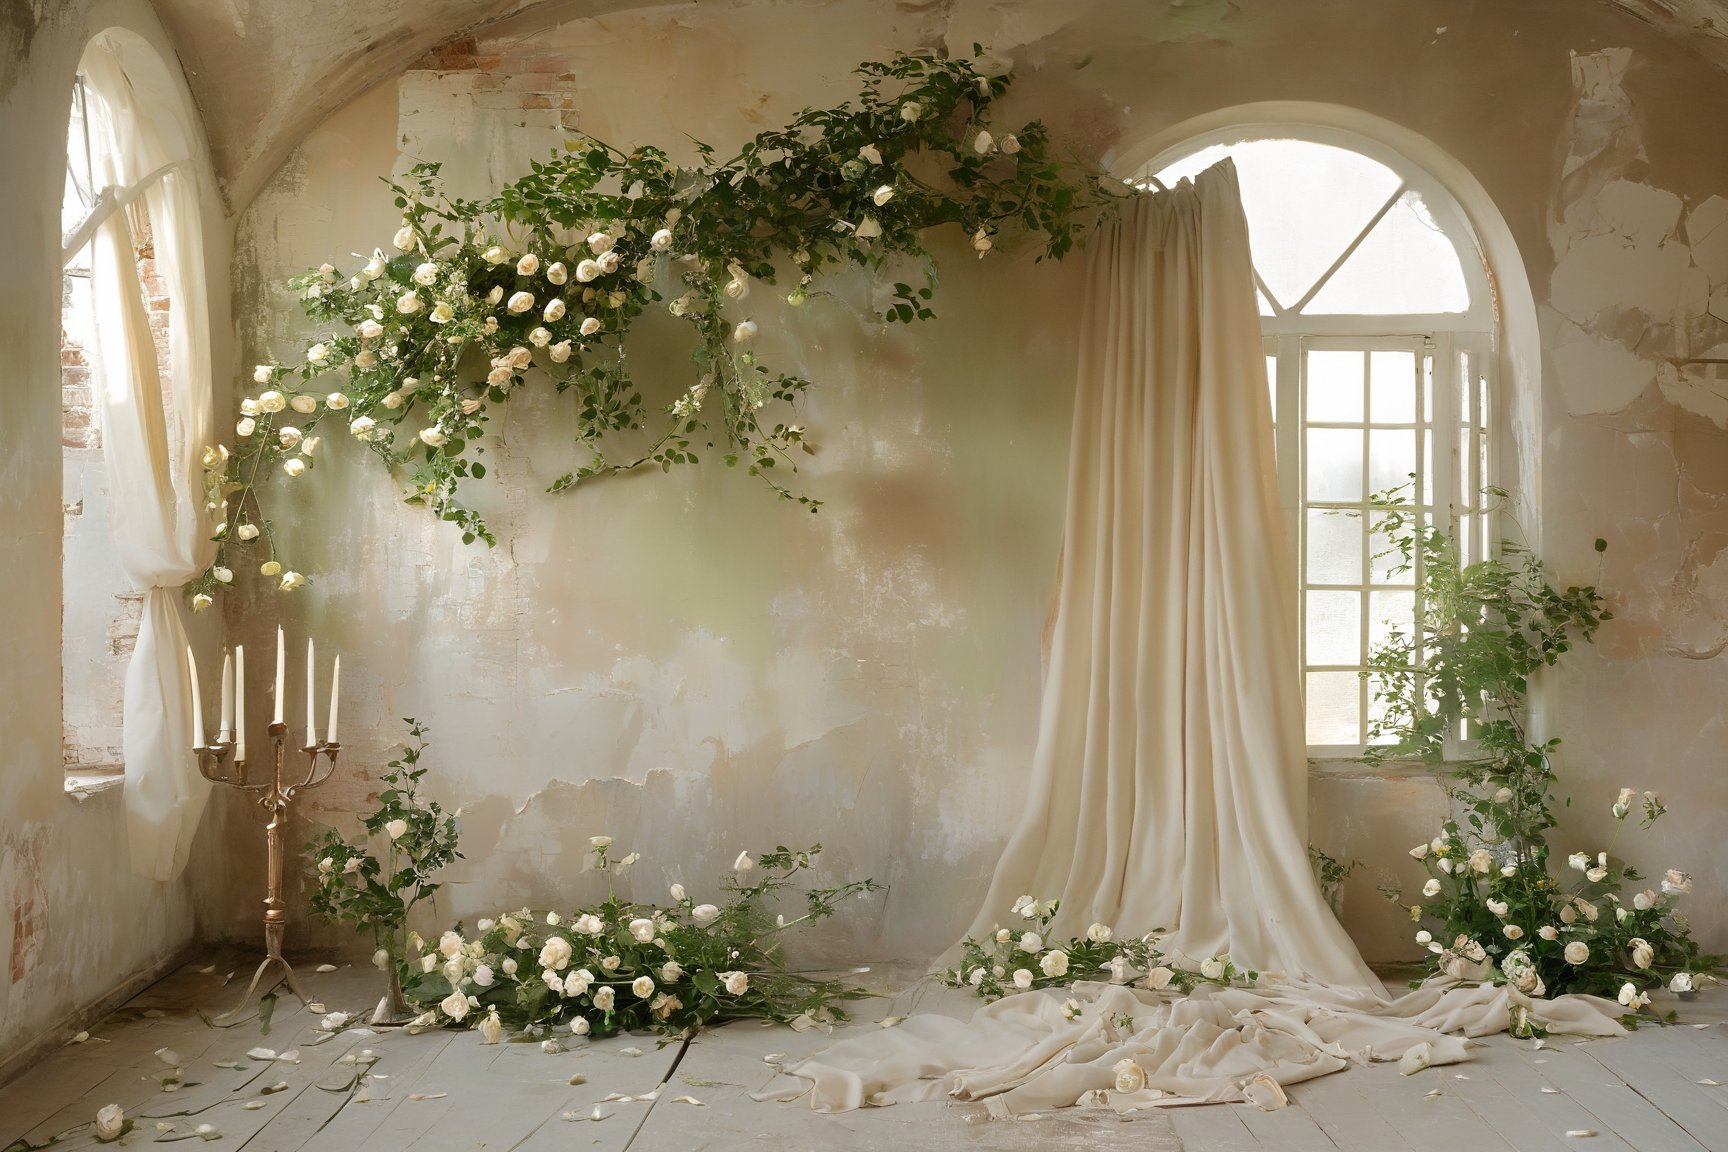 An elegantly aged room with large arched windows that let in soft sunlight. The walls are adorned with faded paint and peeling plaster, revealing the underlying brickwork. The room is filled with lush white roses and green foliage, creating a romantic and ethereal atmosphere. A draped beige curtain hangs on one side, and a vintage candelabra with tall candles stands in the foreground. Petals from the roses scatter on the worn wooden floor, adding to the dreamy ambiance.